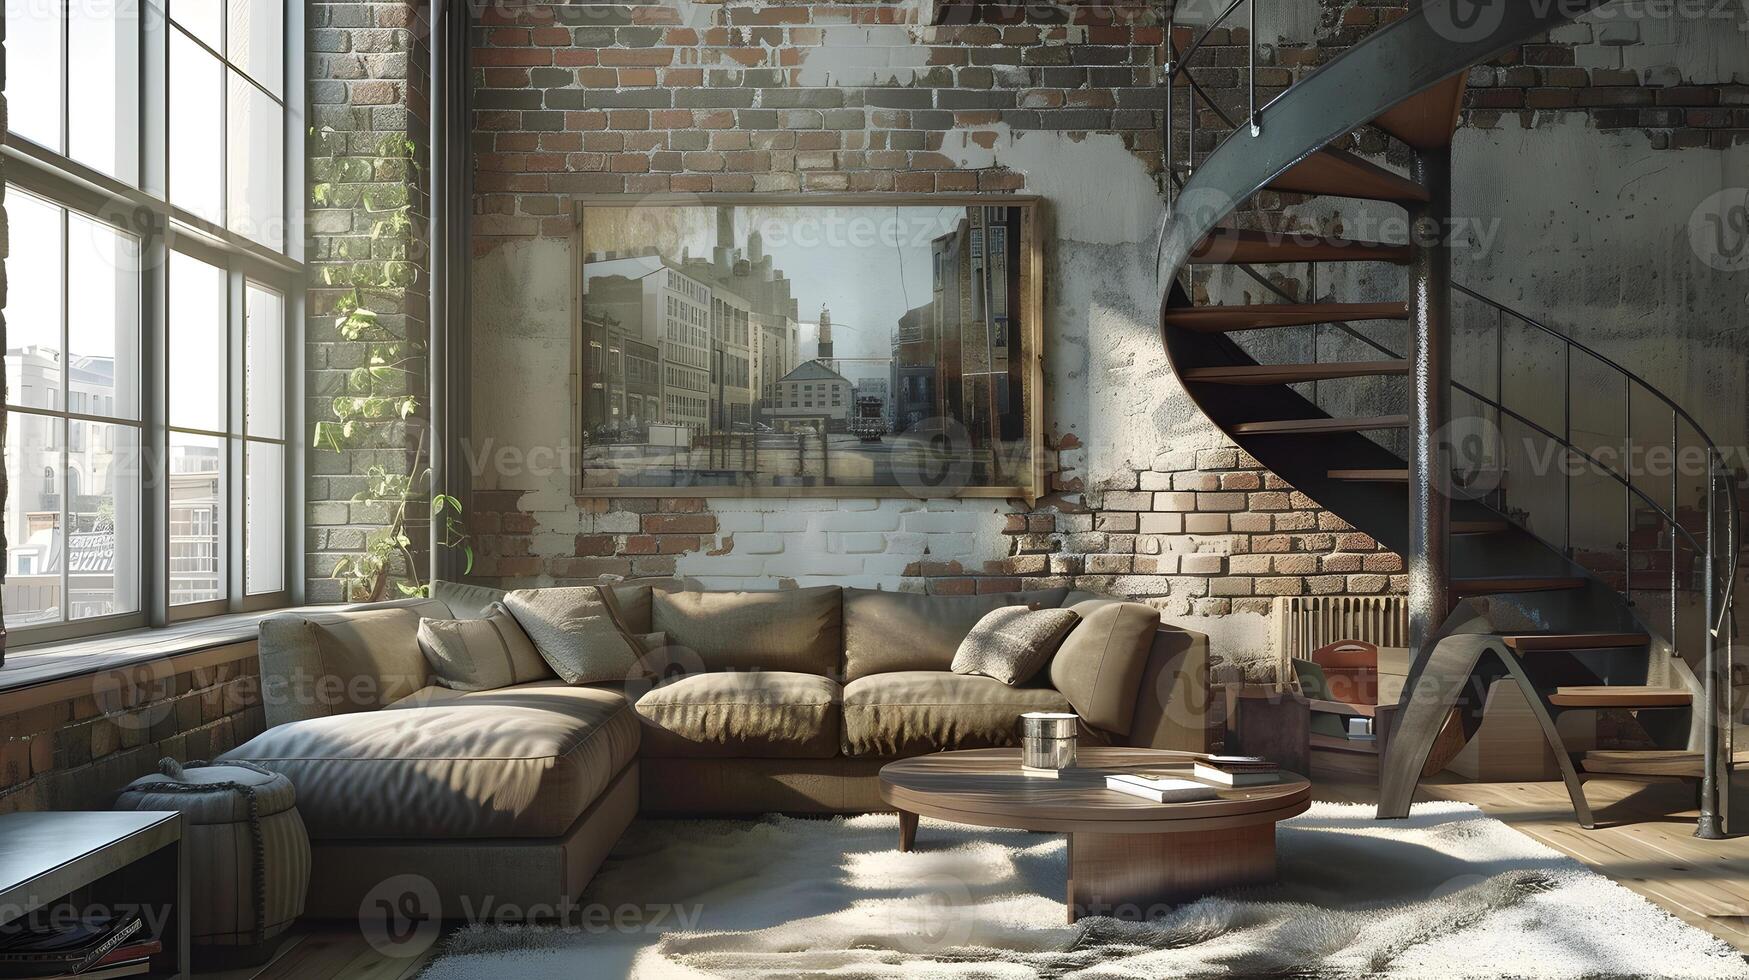 Stunning Loft-Style Living Room with Brick Walls and Contemporary Furniture Exuding a Cozy and Inviting Ambiance photo